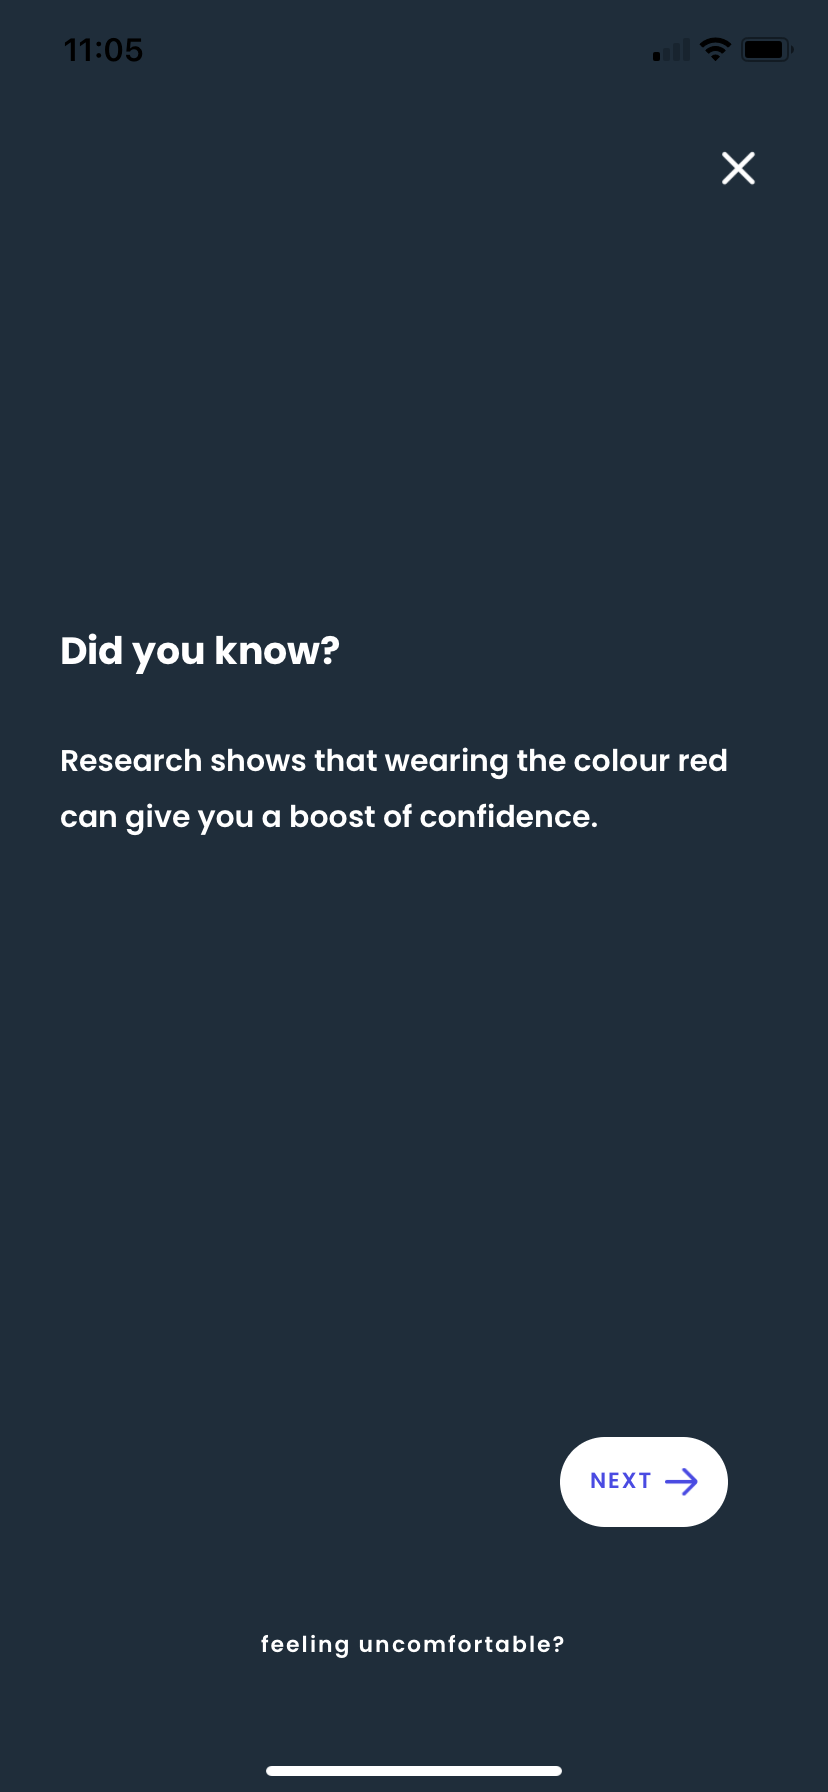 A screenshot from the Fika app. It reads 'Did you know? Research shows that wearing the colour red can give you a boost of confidence.'